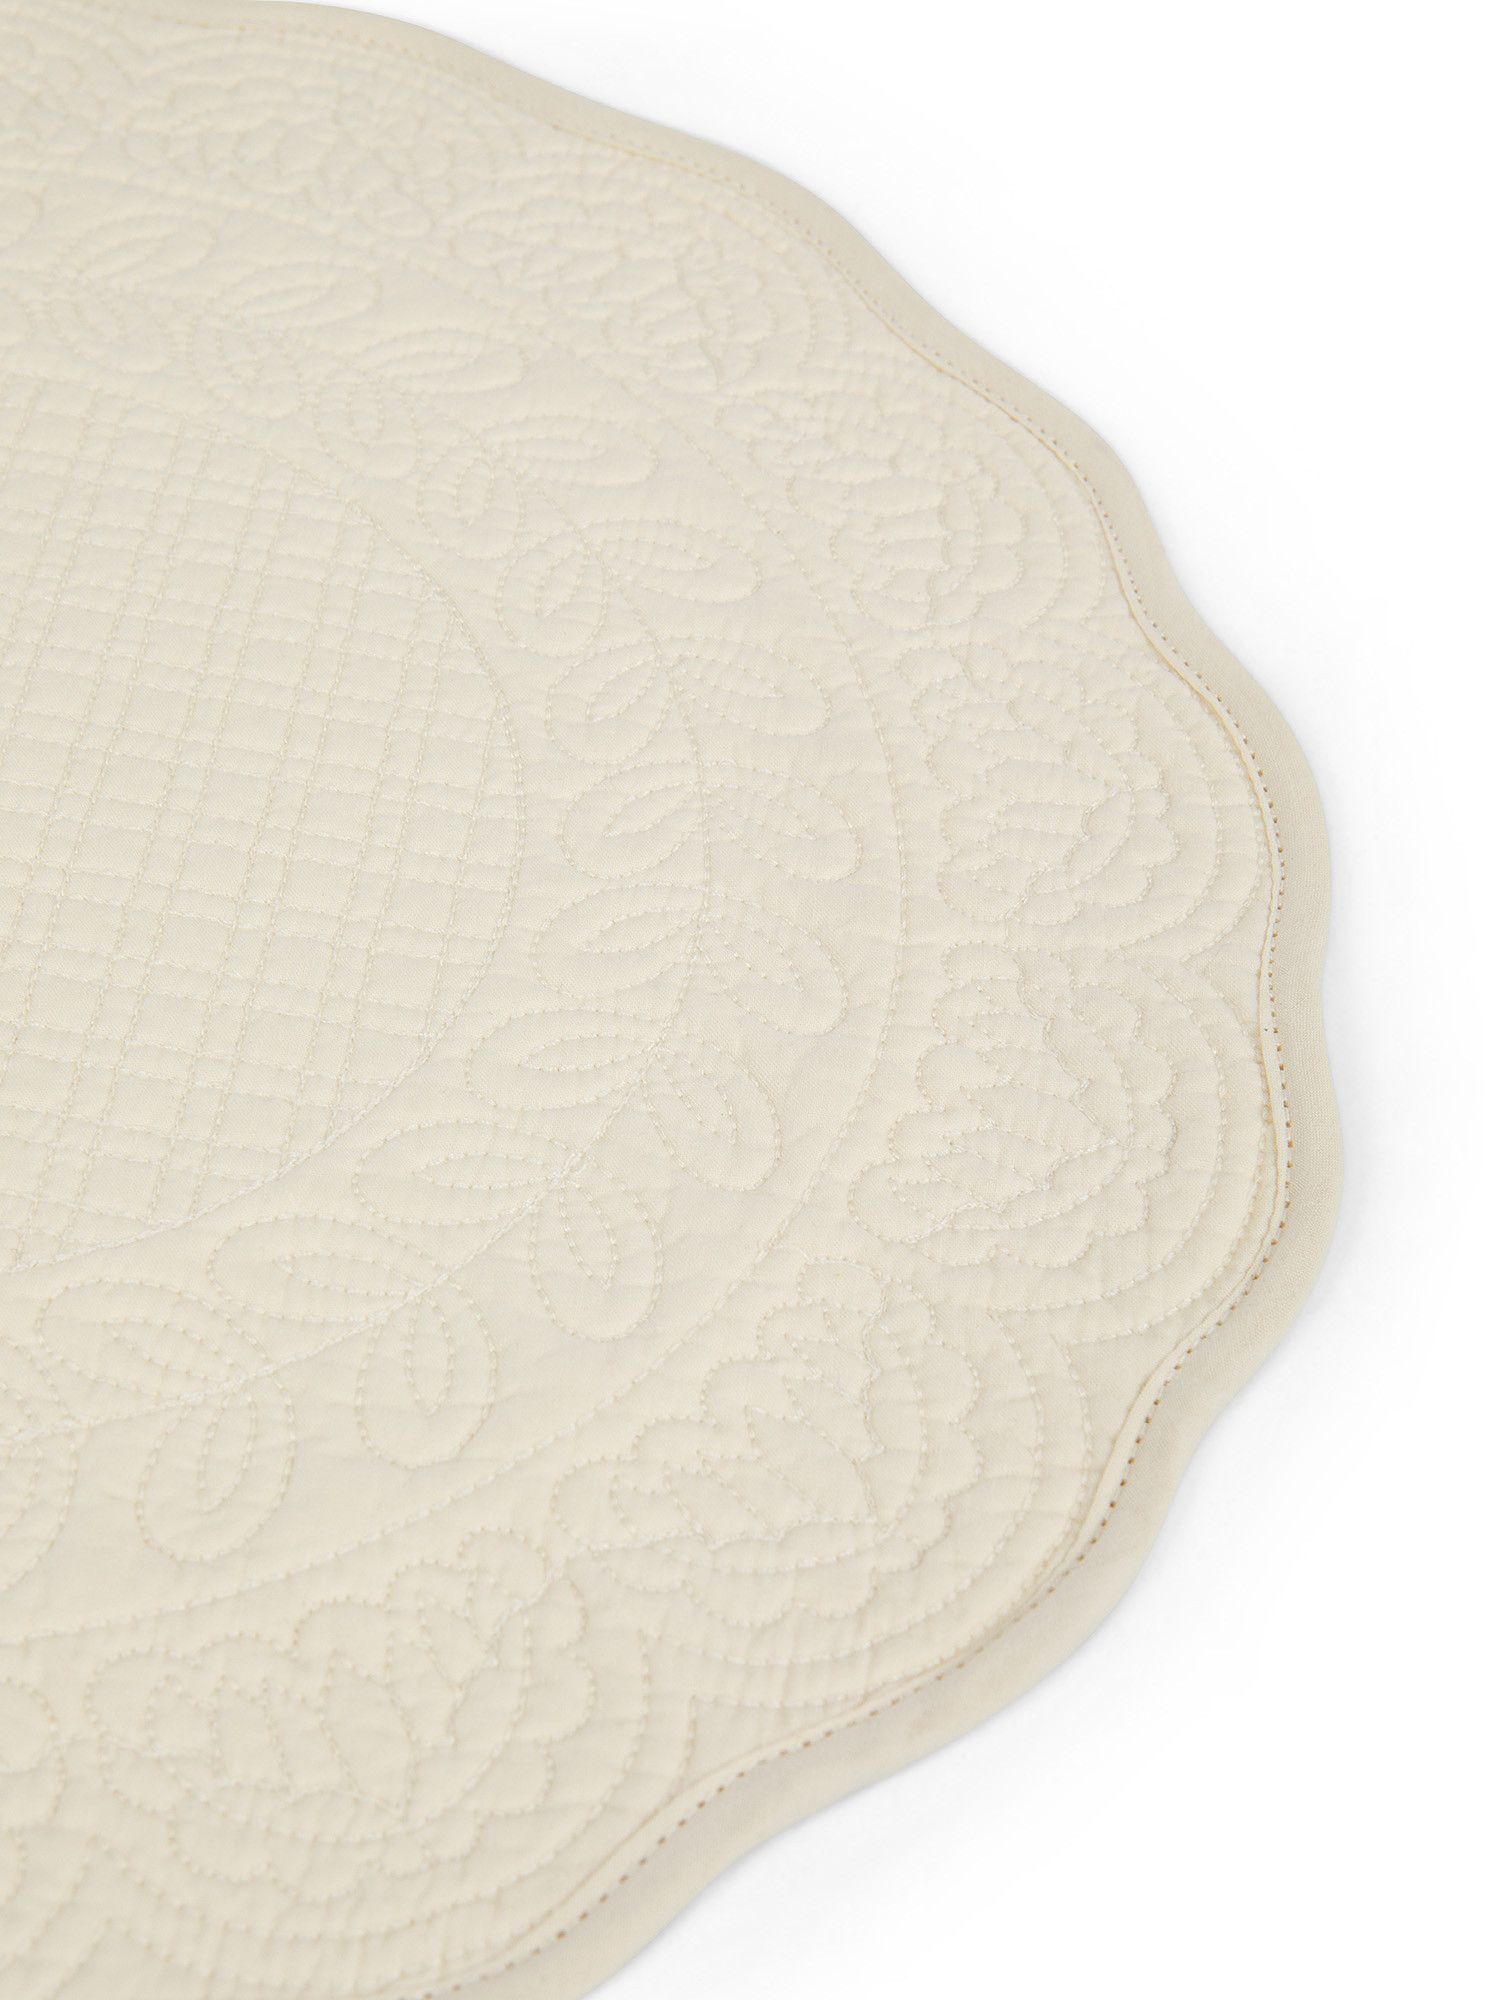 Quilted round placemat, Beige, large image number 1